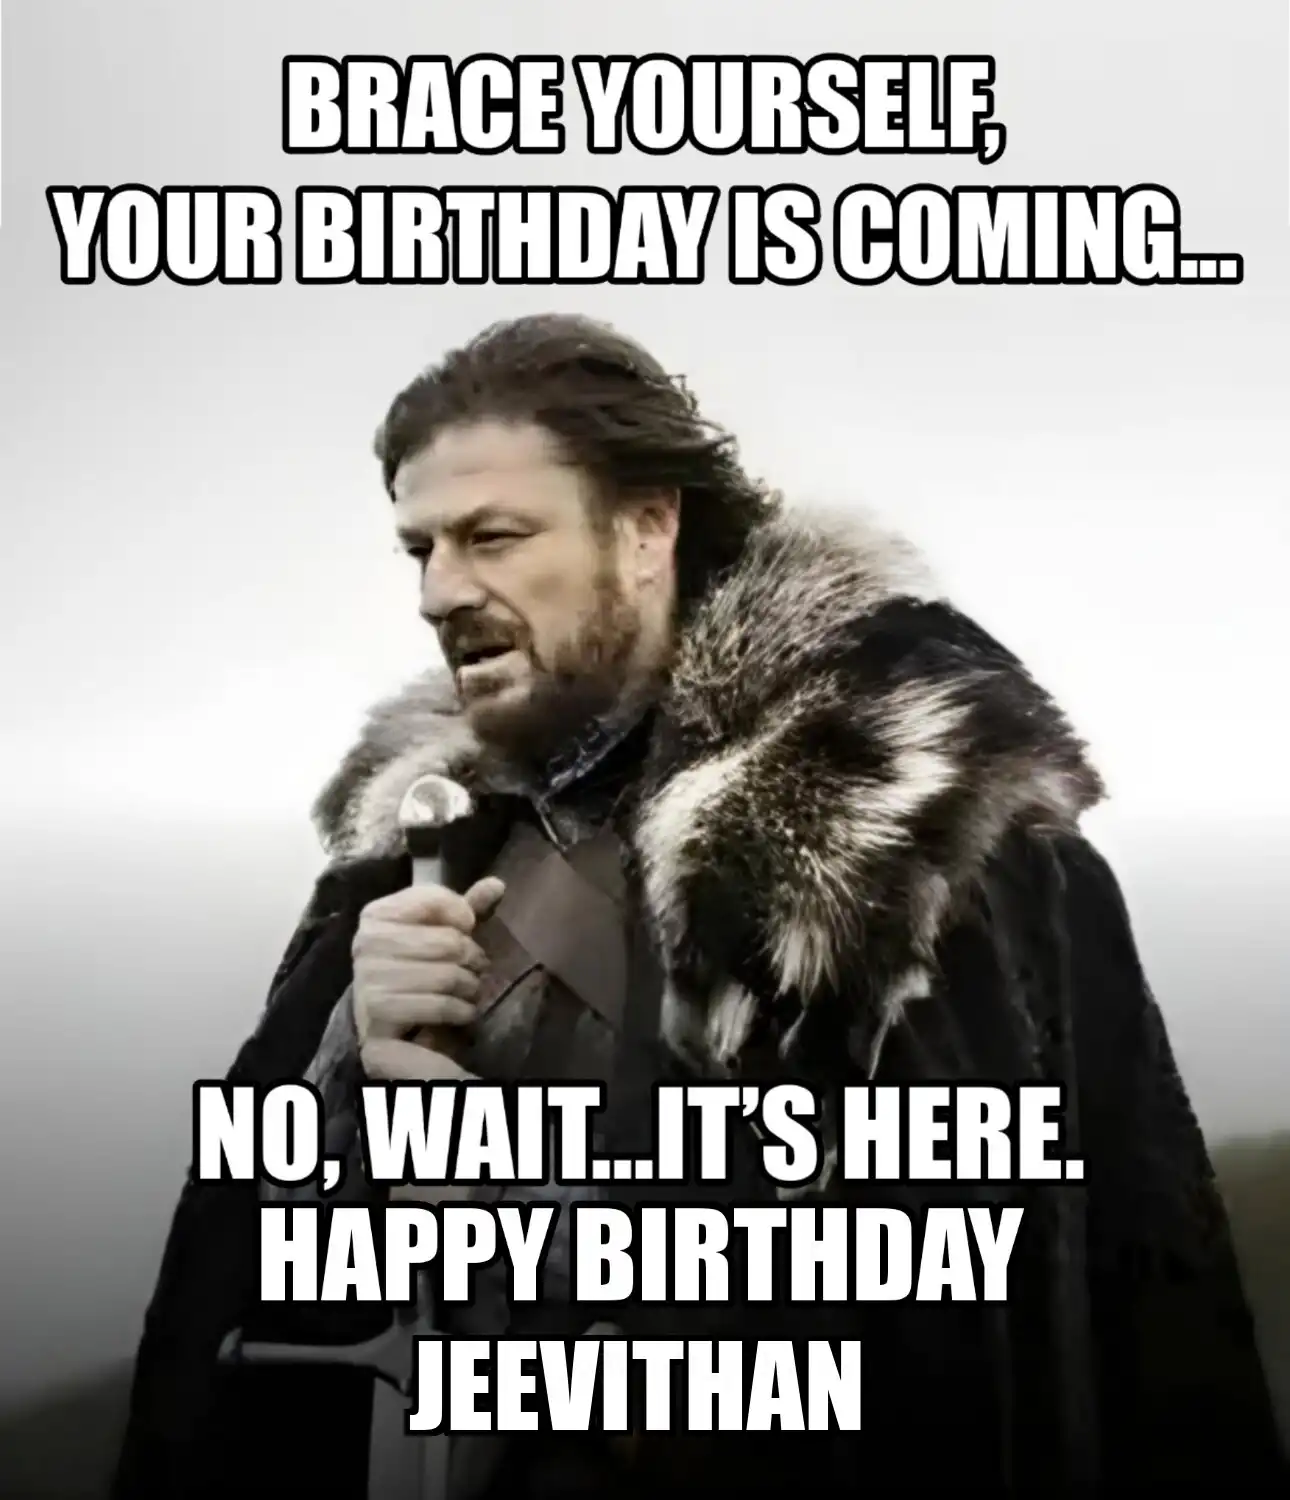 Happy Birthday Jeevithan Brace Yourself Your Birthday Is Coming Meme